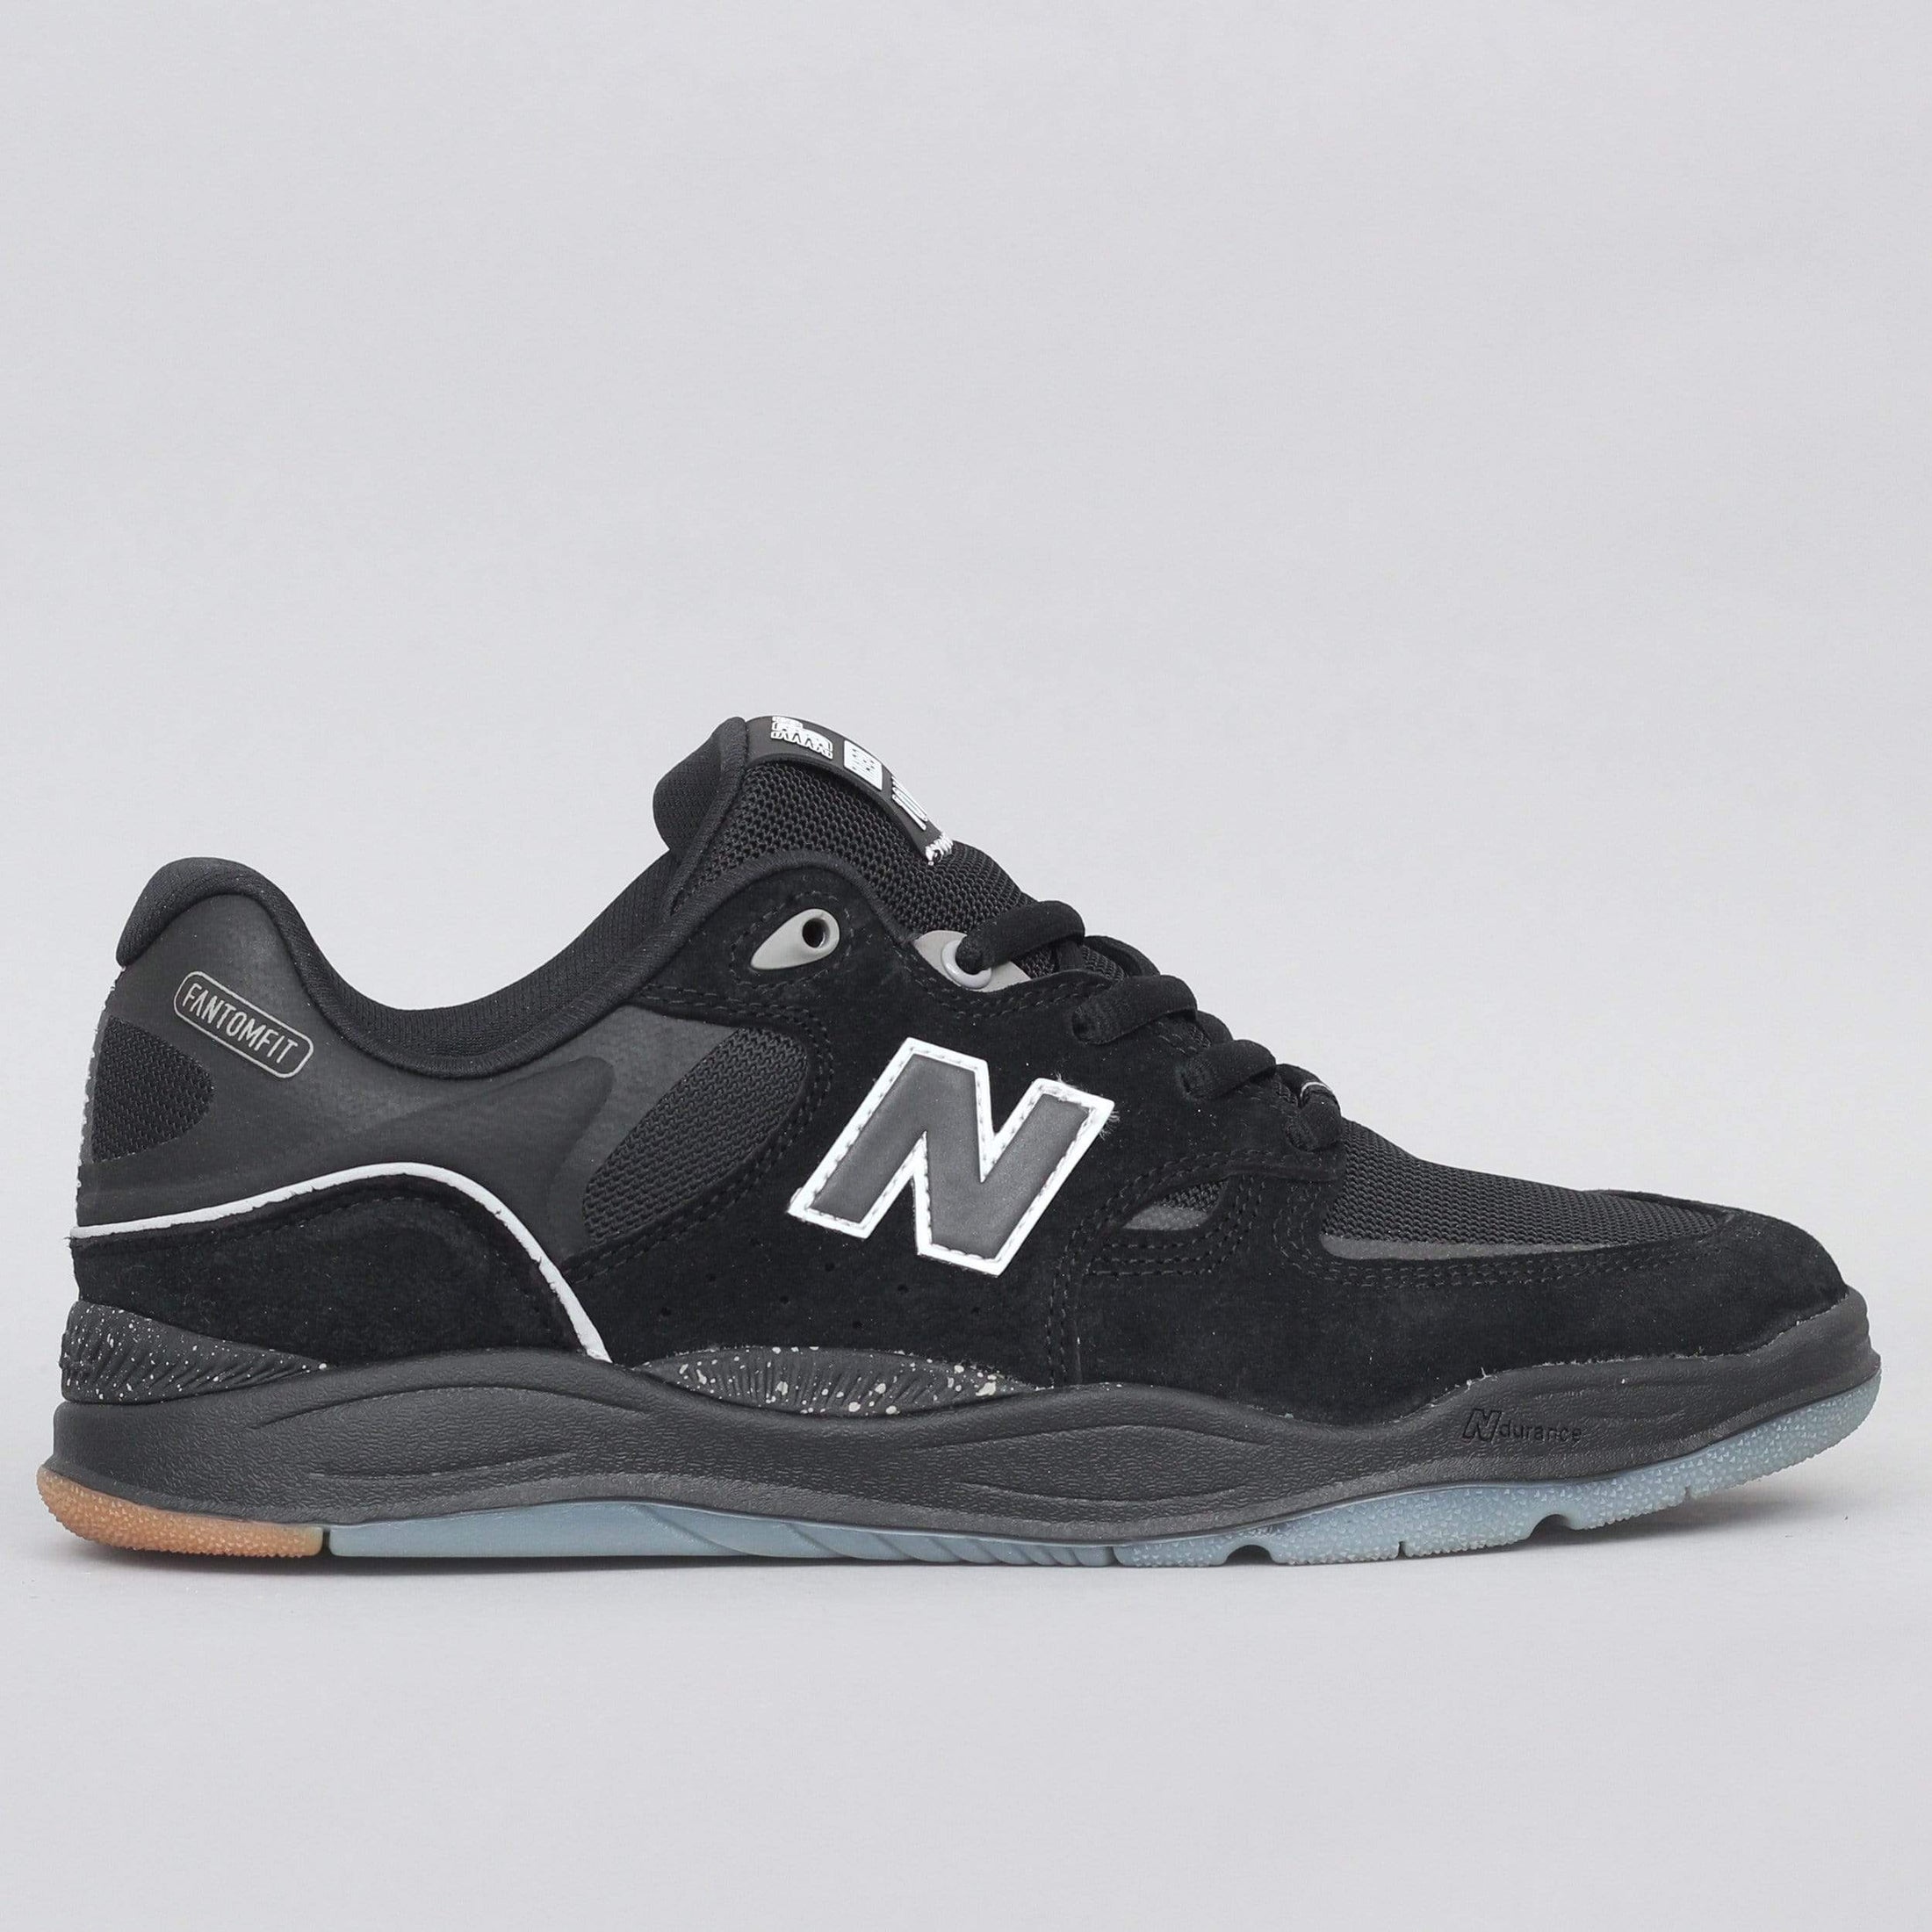 New Balance Tiago 1010 Shoes Black / Red